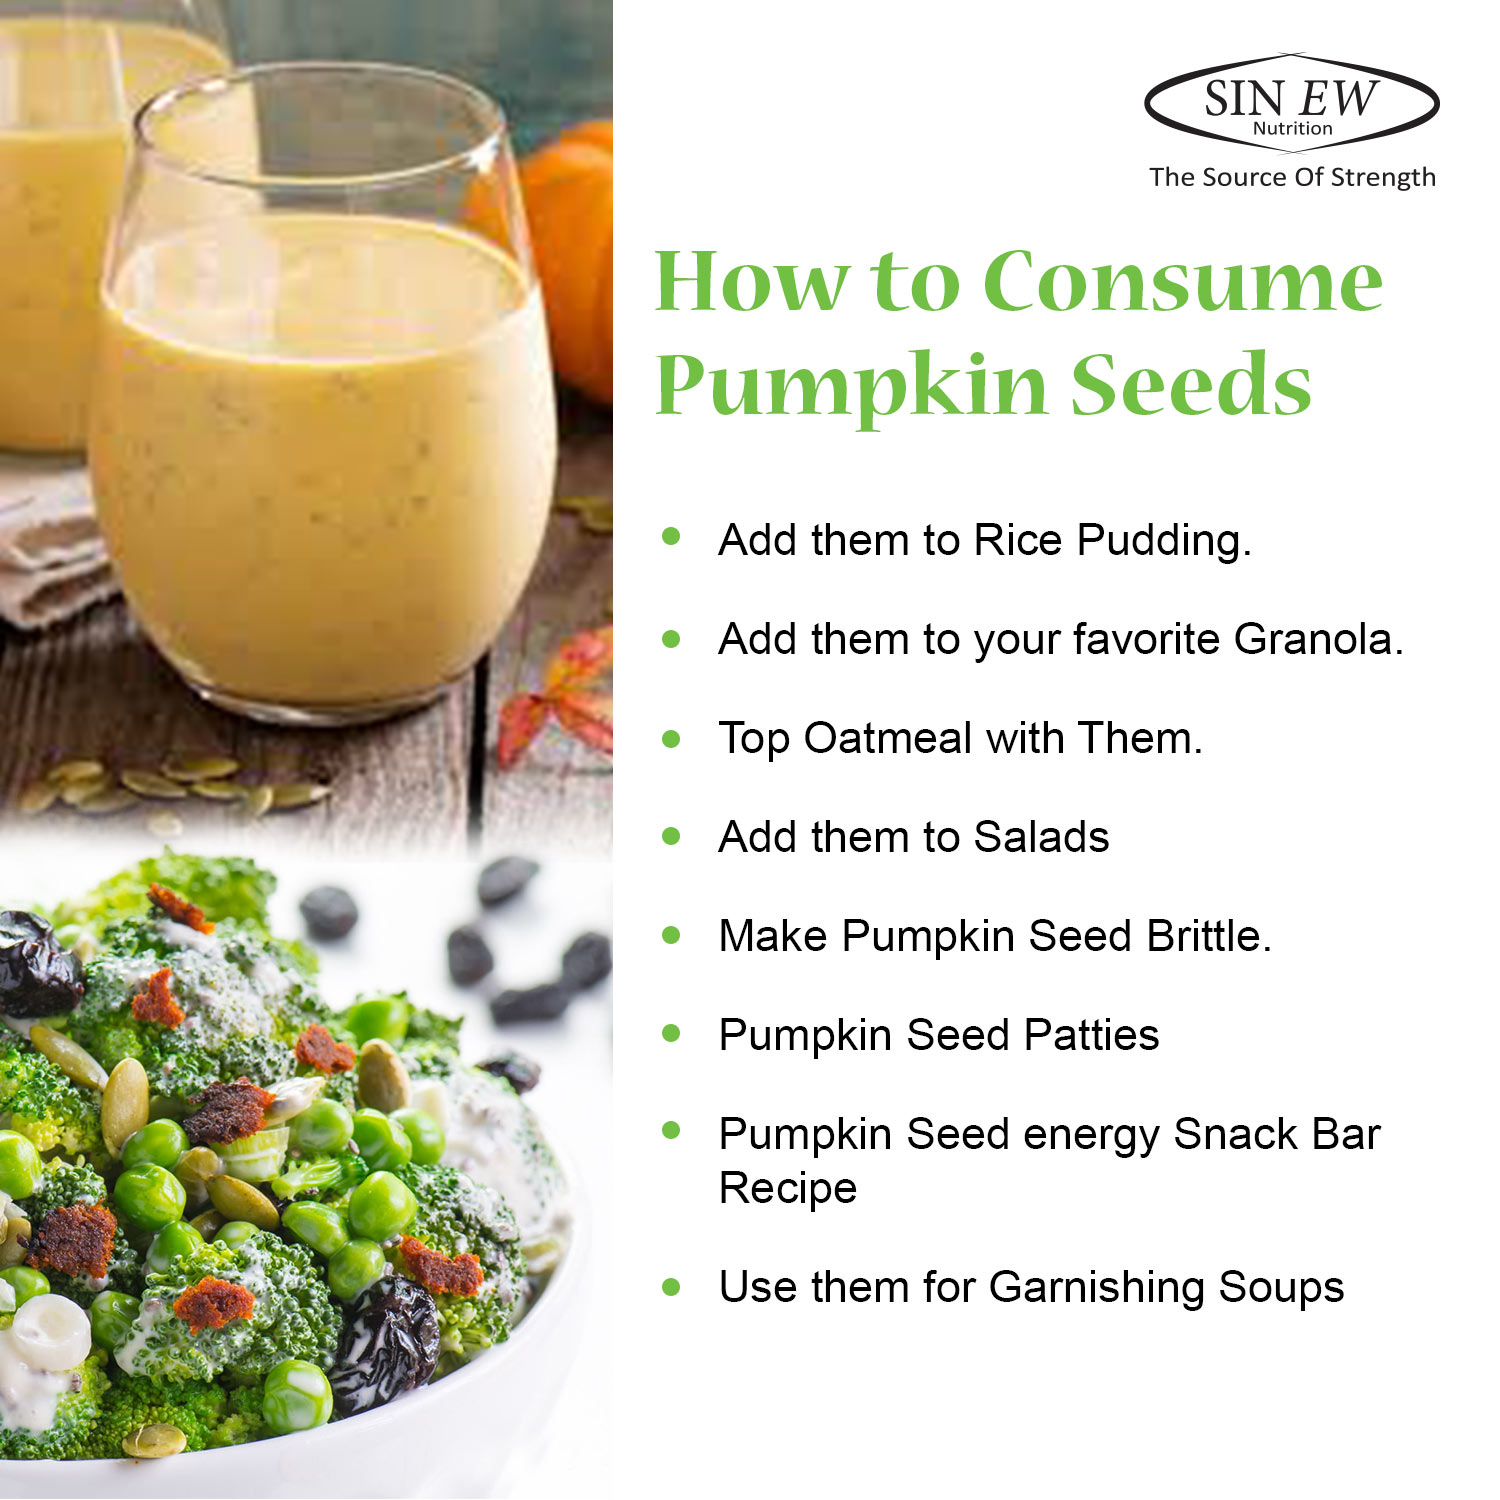 How To Consume Pumpkin Seeds